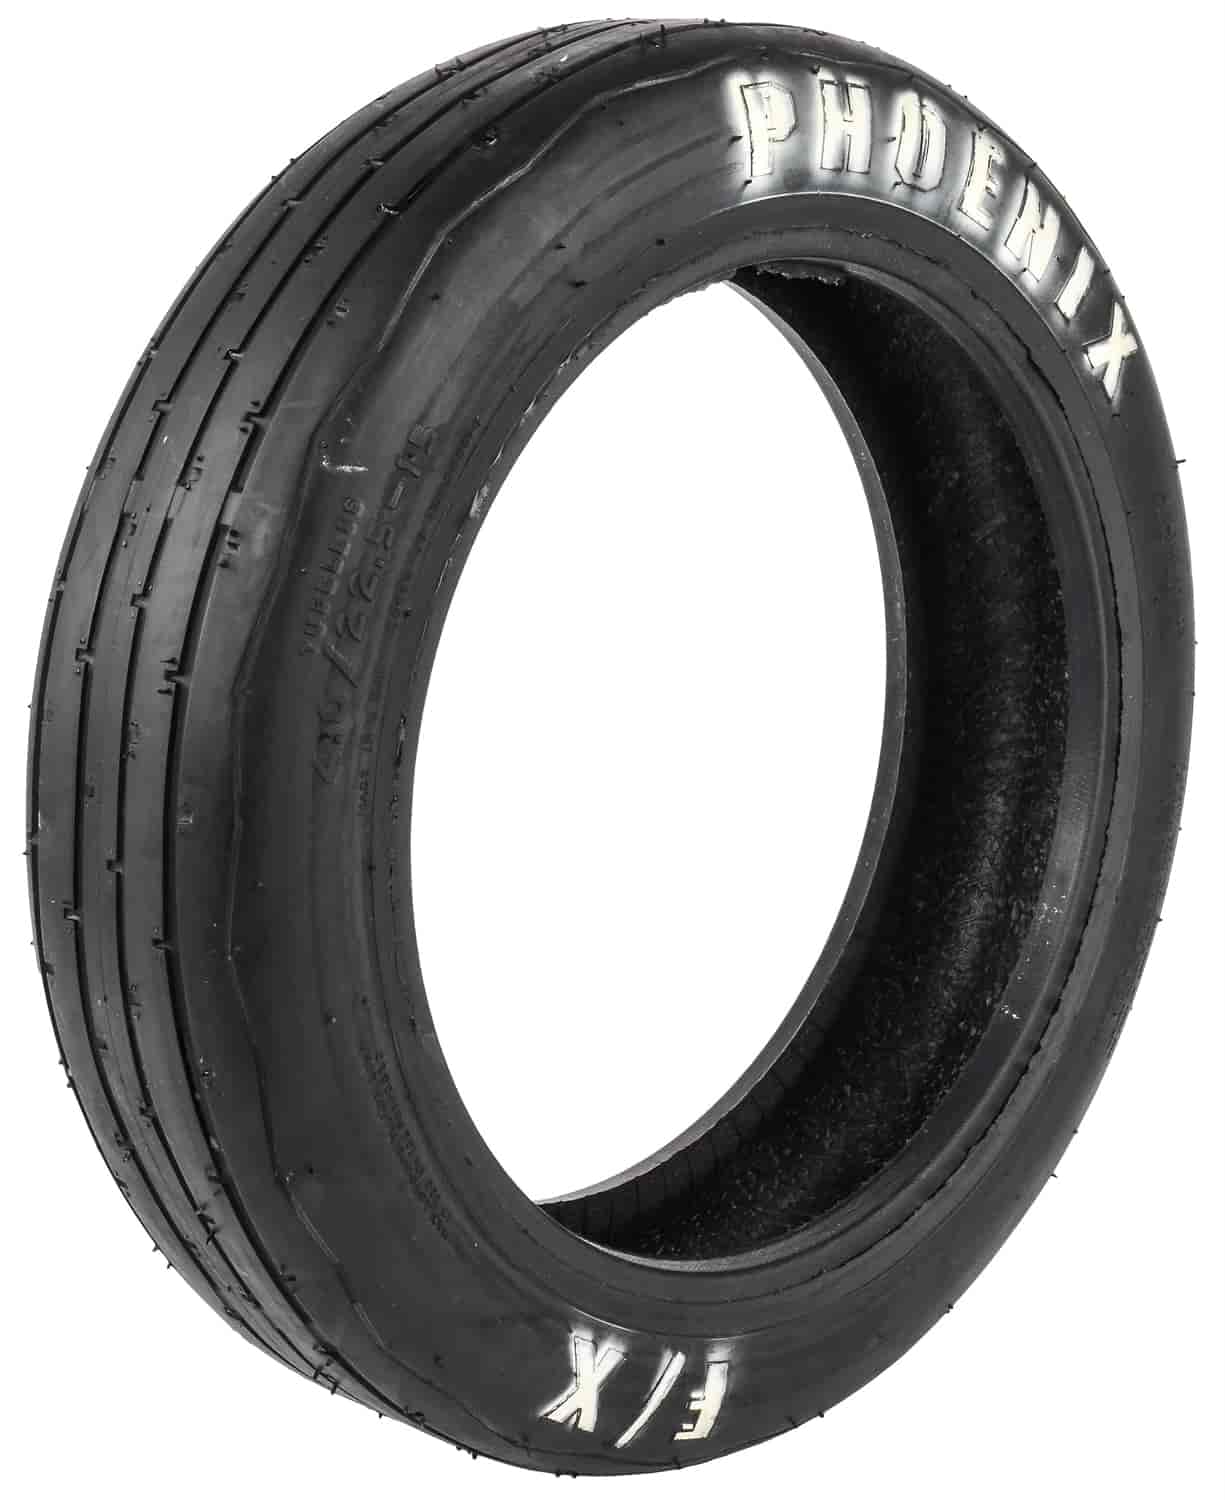 Front Drag Tire 22.5" x 4.0" - 15"